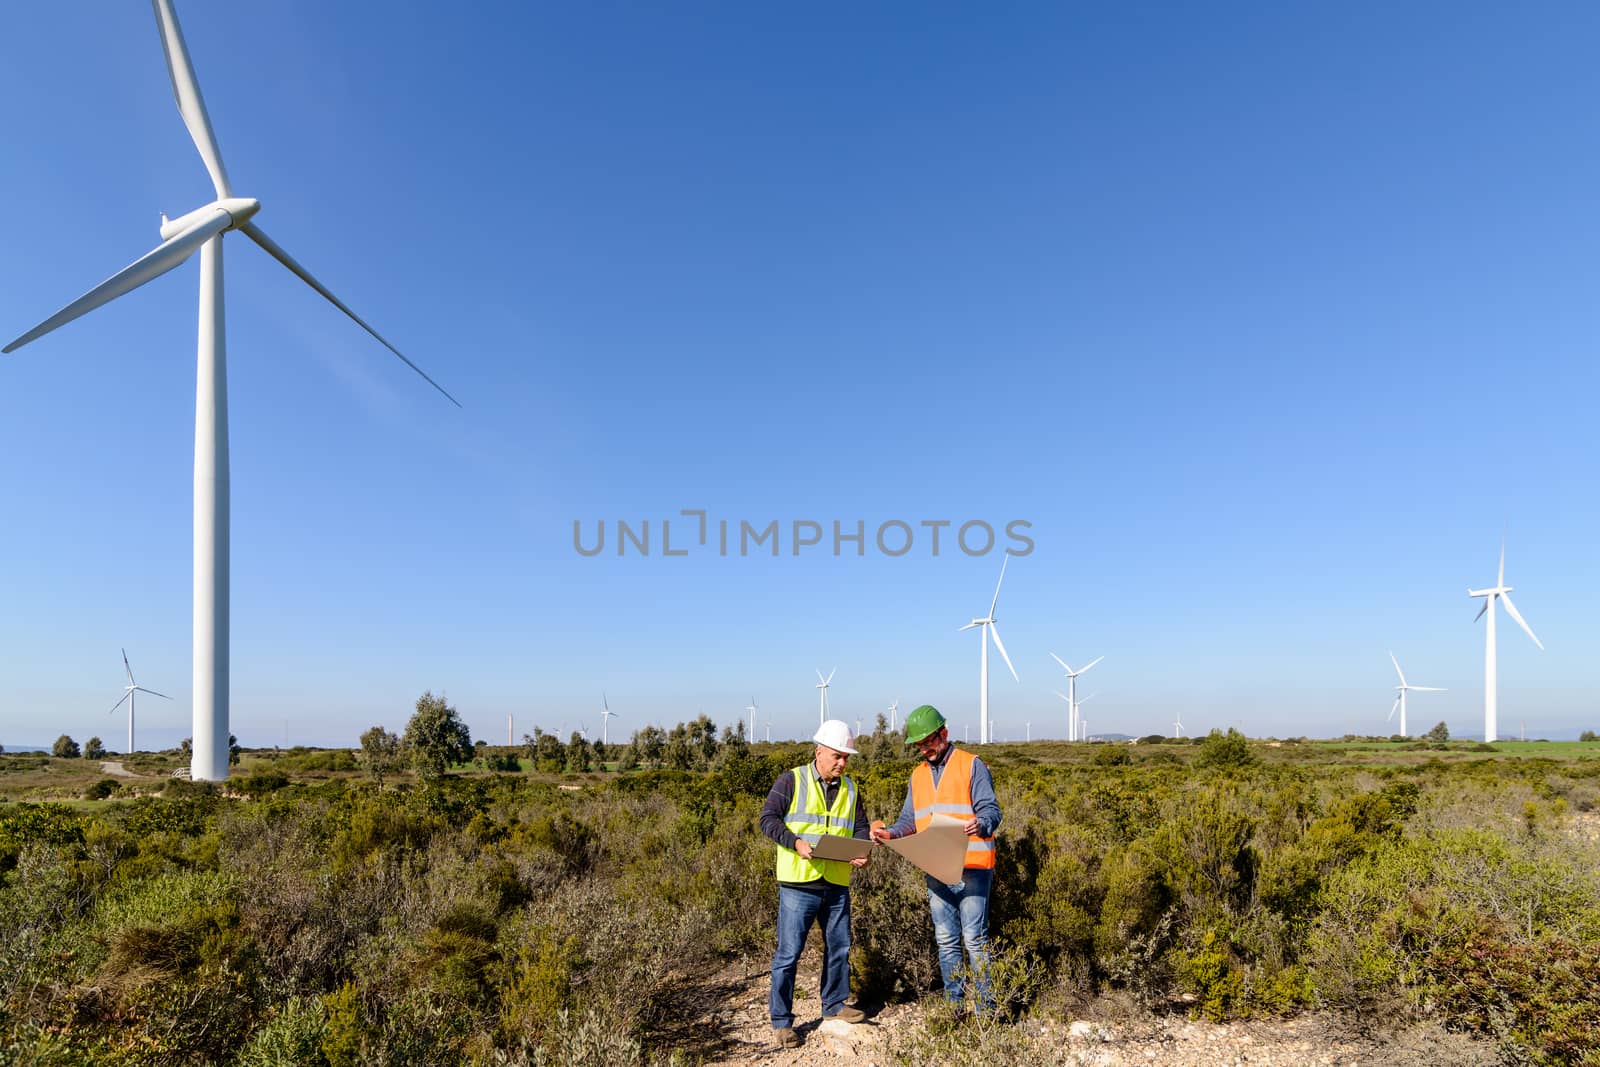 Engineers of wind turbine control projects and production.